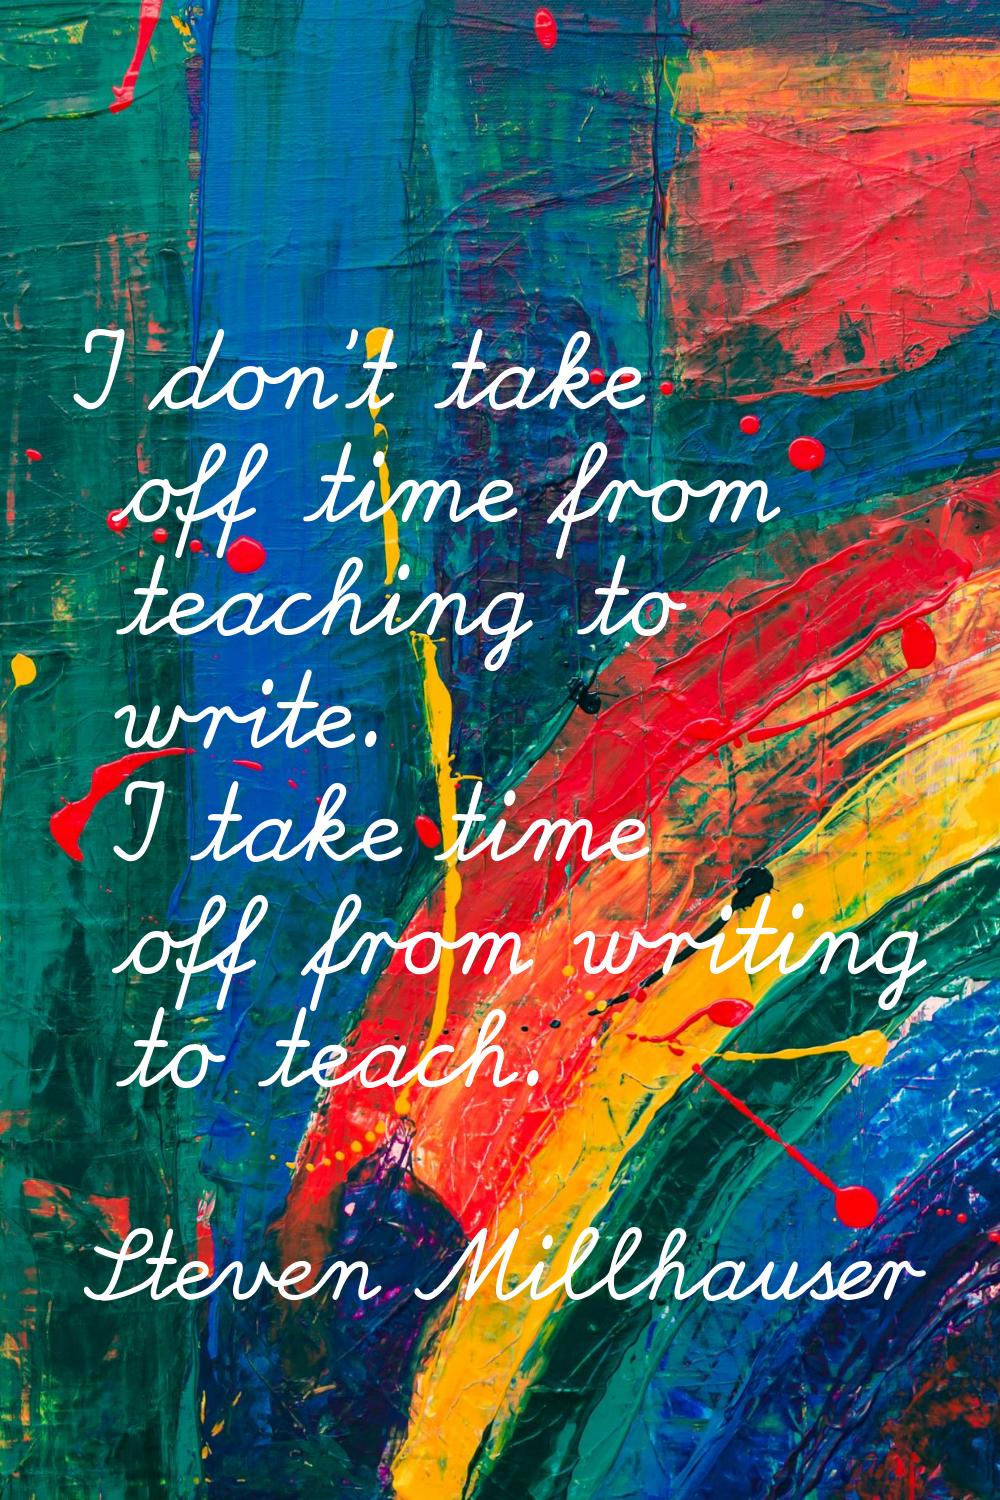 I don't take off time from teaching to write. I take time off from writing to teach.